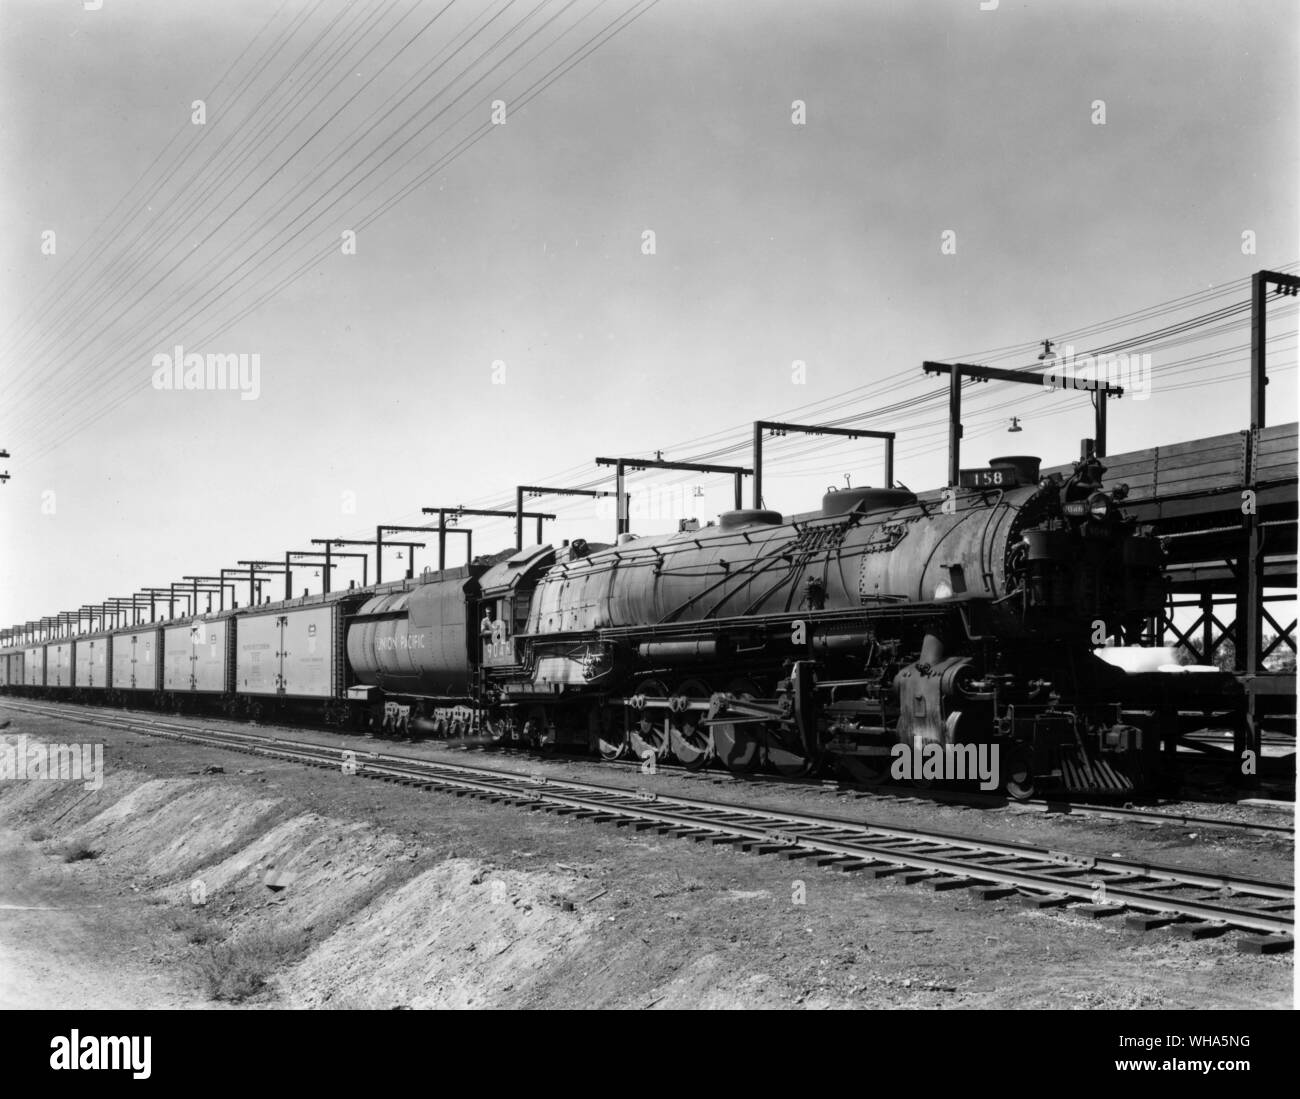 Union Pacific. Pacific Class Steam Locomotive. 4-12-2 wheel arrangement UP Class designation. First of type built in 1926 for freight service. With string of new PFE cars at Nampa, idaho Icing Dock Stock Photo